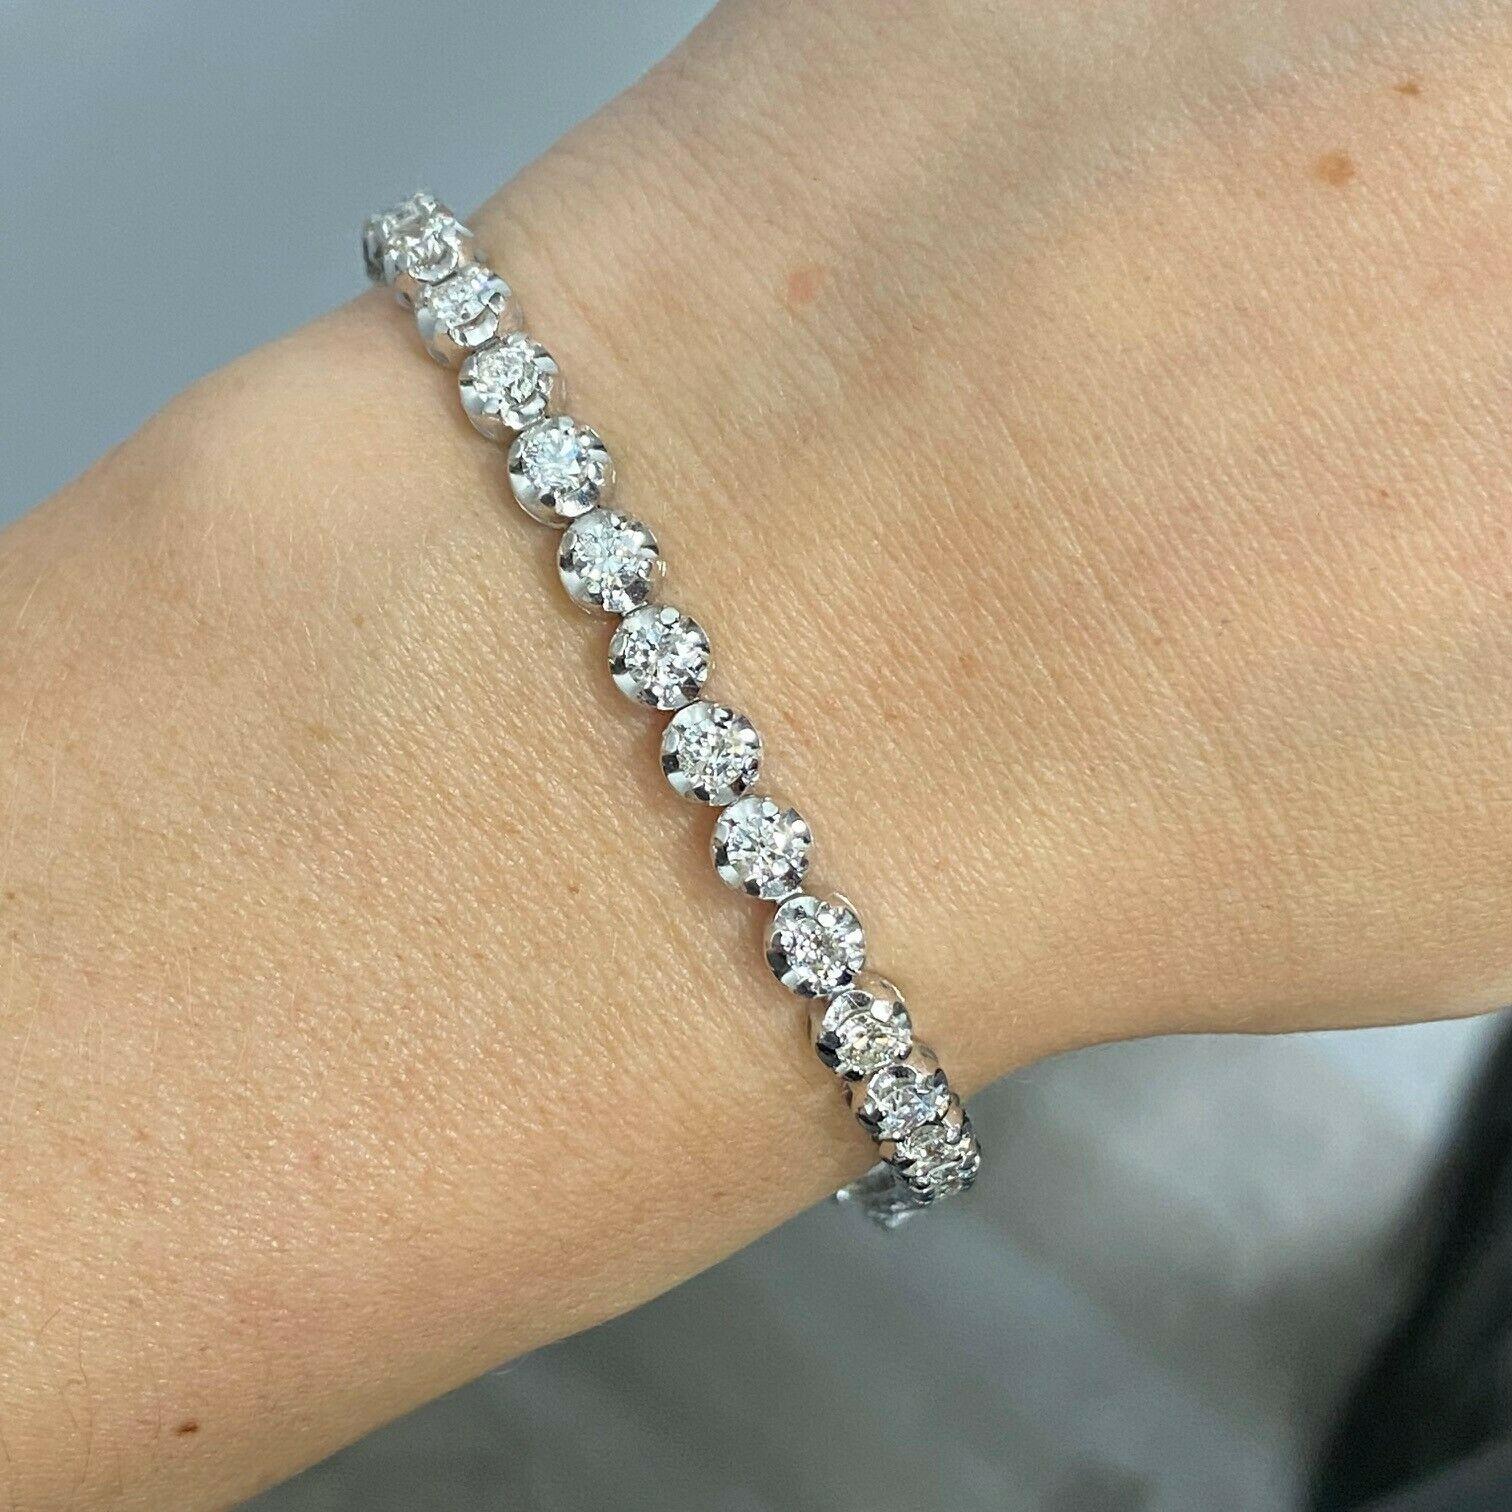 Contemporary 14k White Gold Diamond Tennis Illusion Setting Bracelet Weighing 4.35 Ctw For Sale